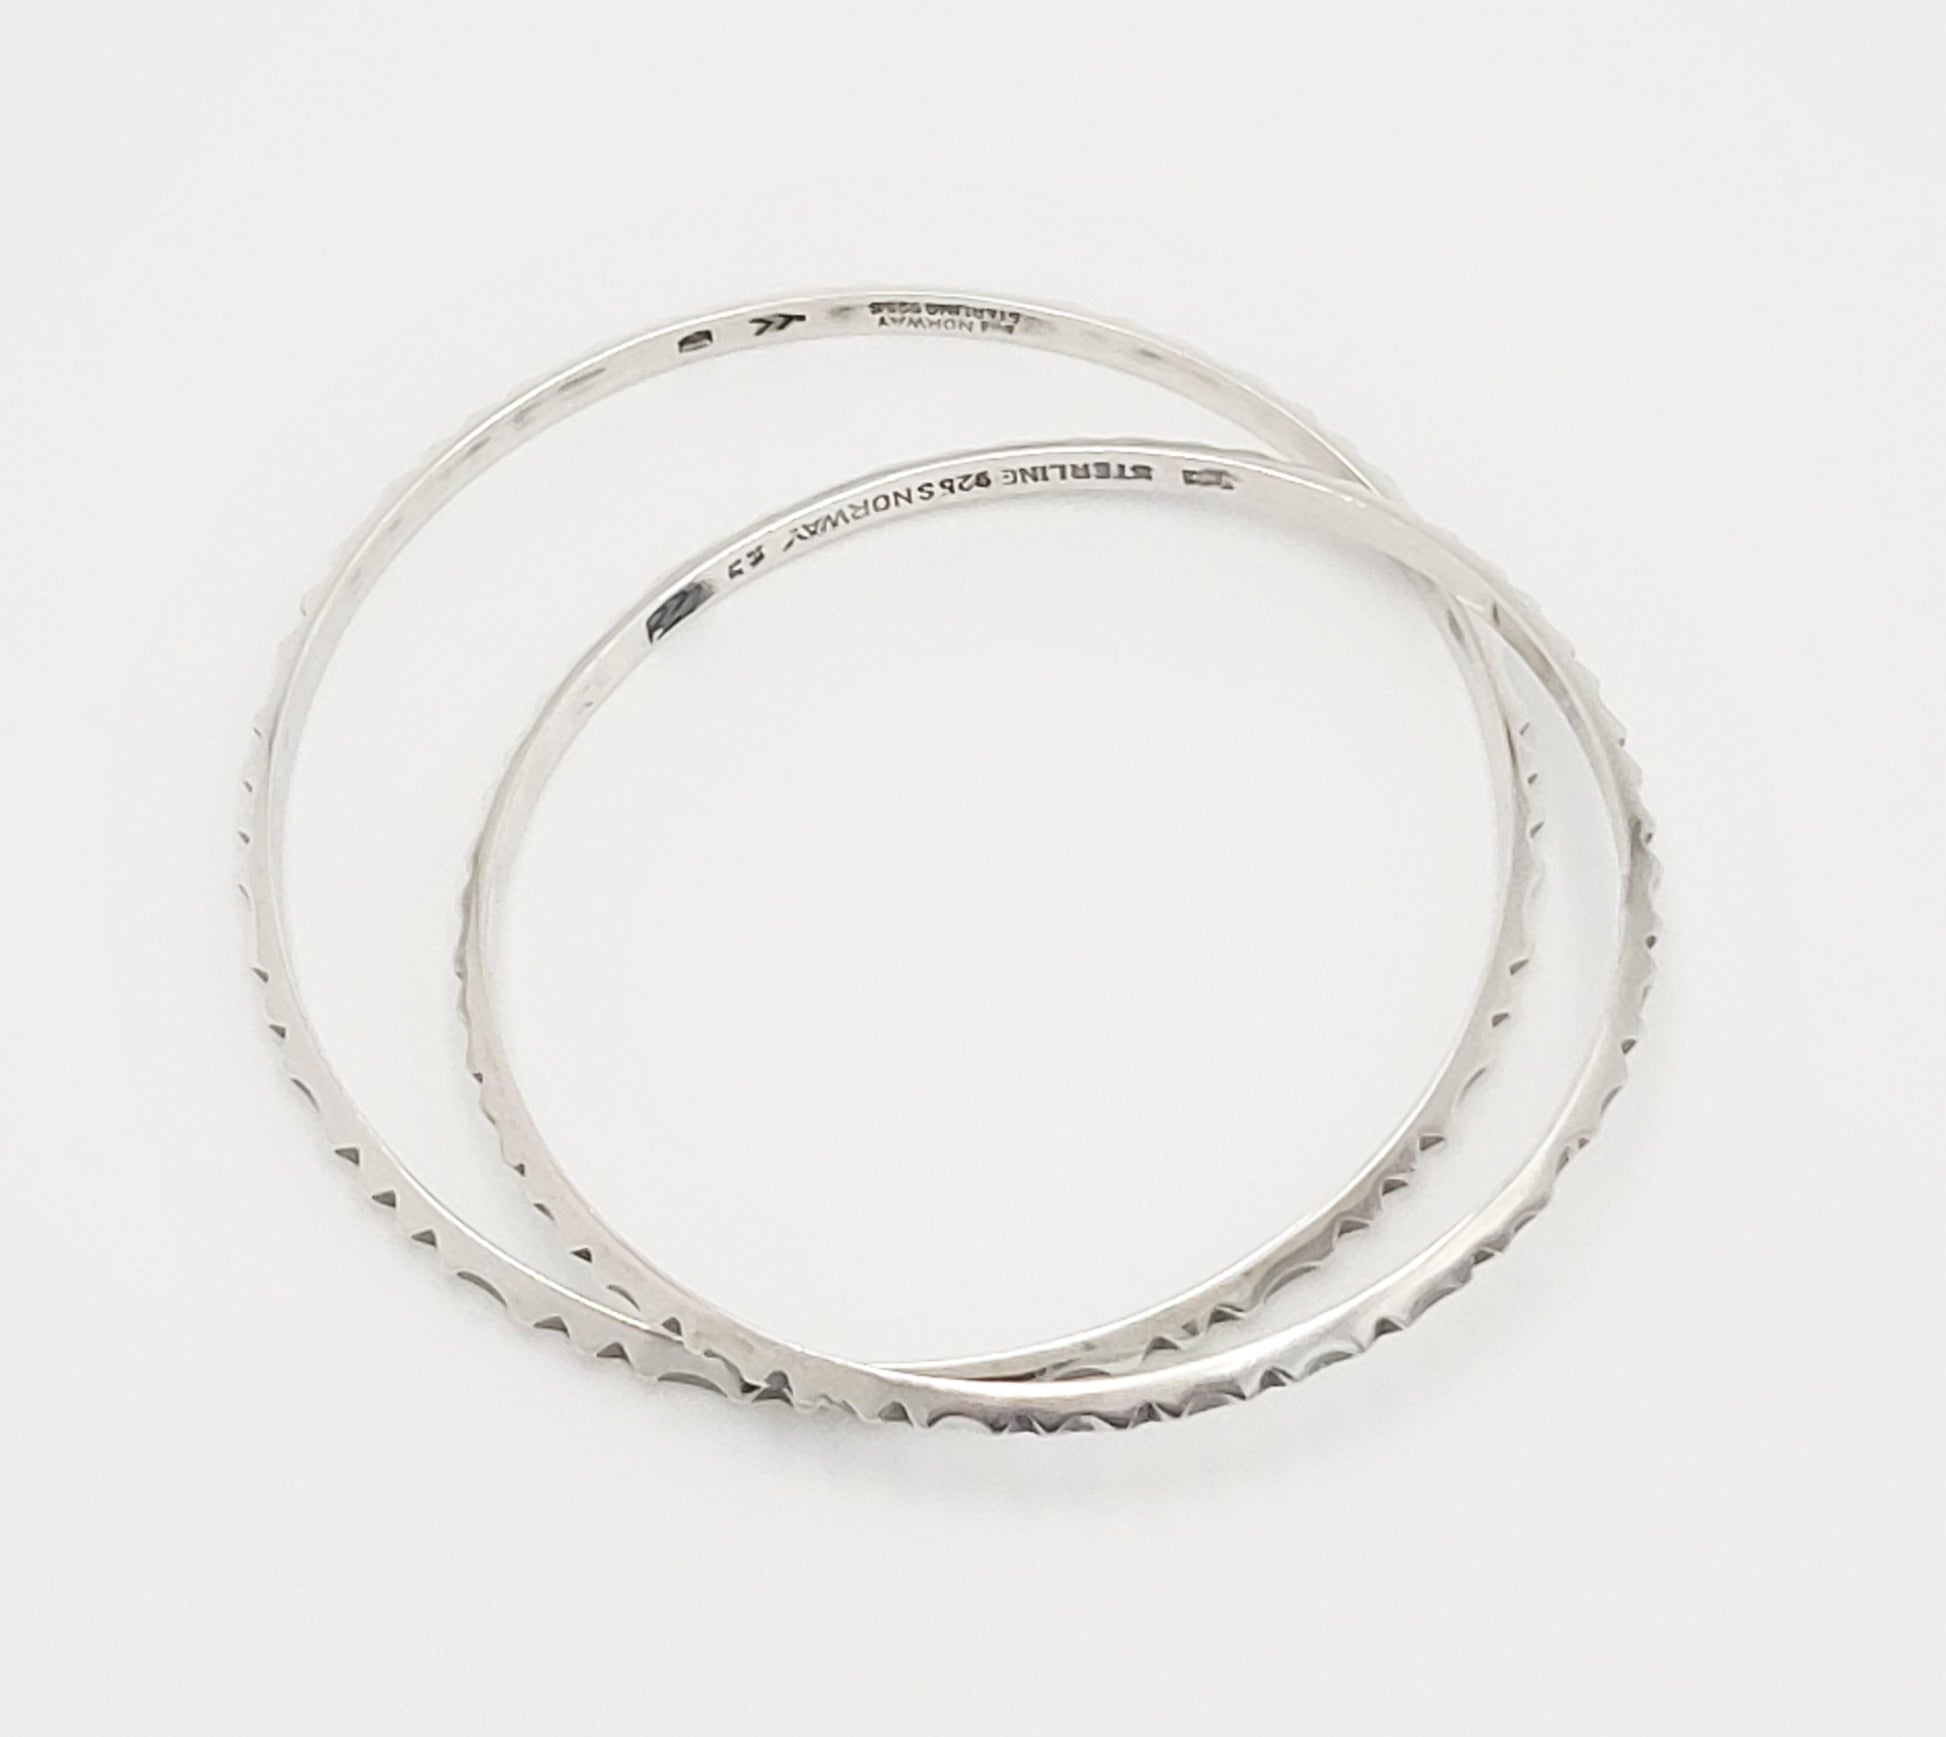 Norway Plus Designs Jewelry Norway + Designs Erling Christoffersen Set of 2 Sterling Silver Bangles 1960s